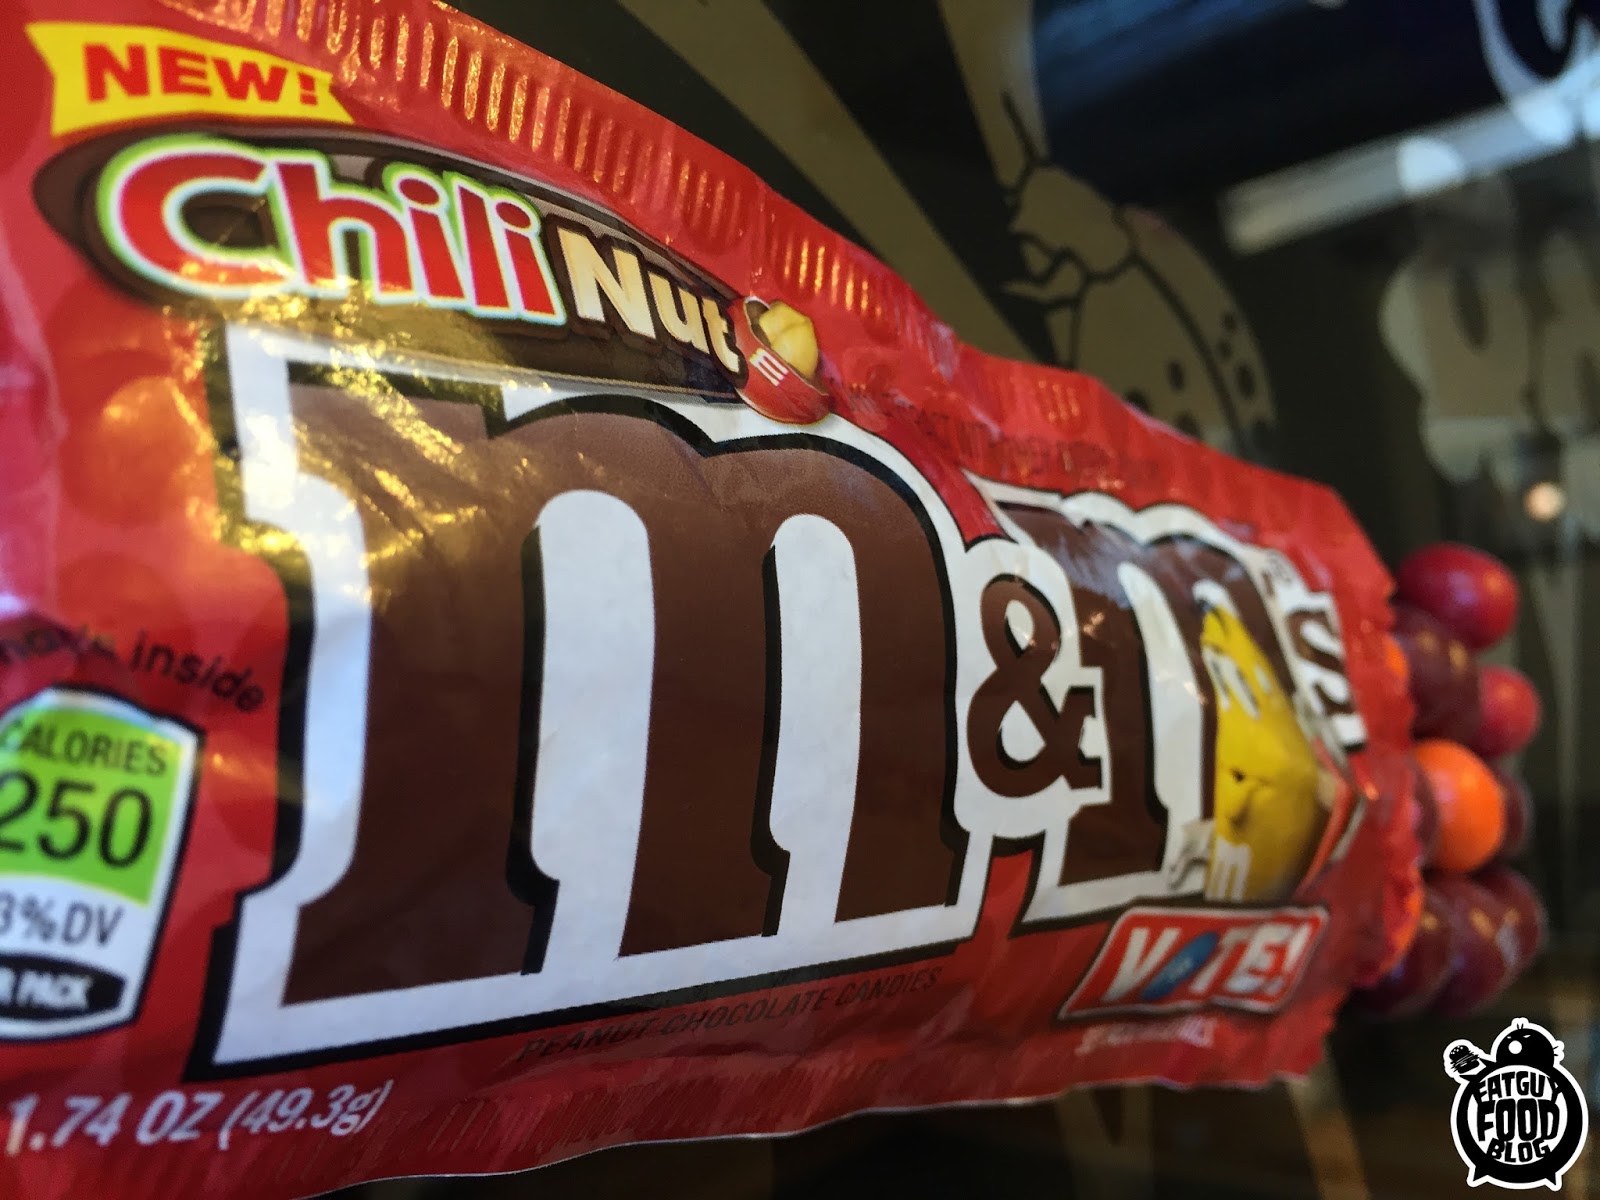 Say Hello to Jalapeño Peanut M&M's — and 2 Other New Flavors